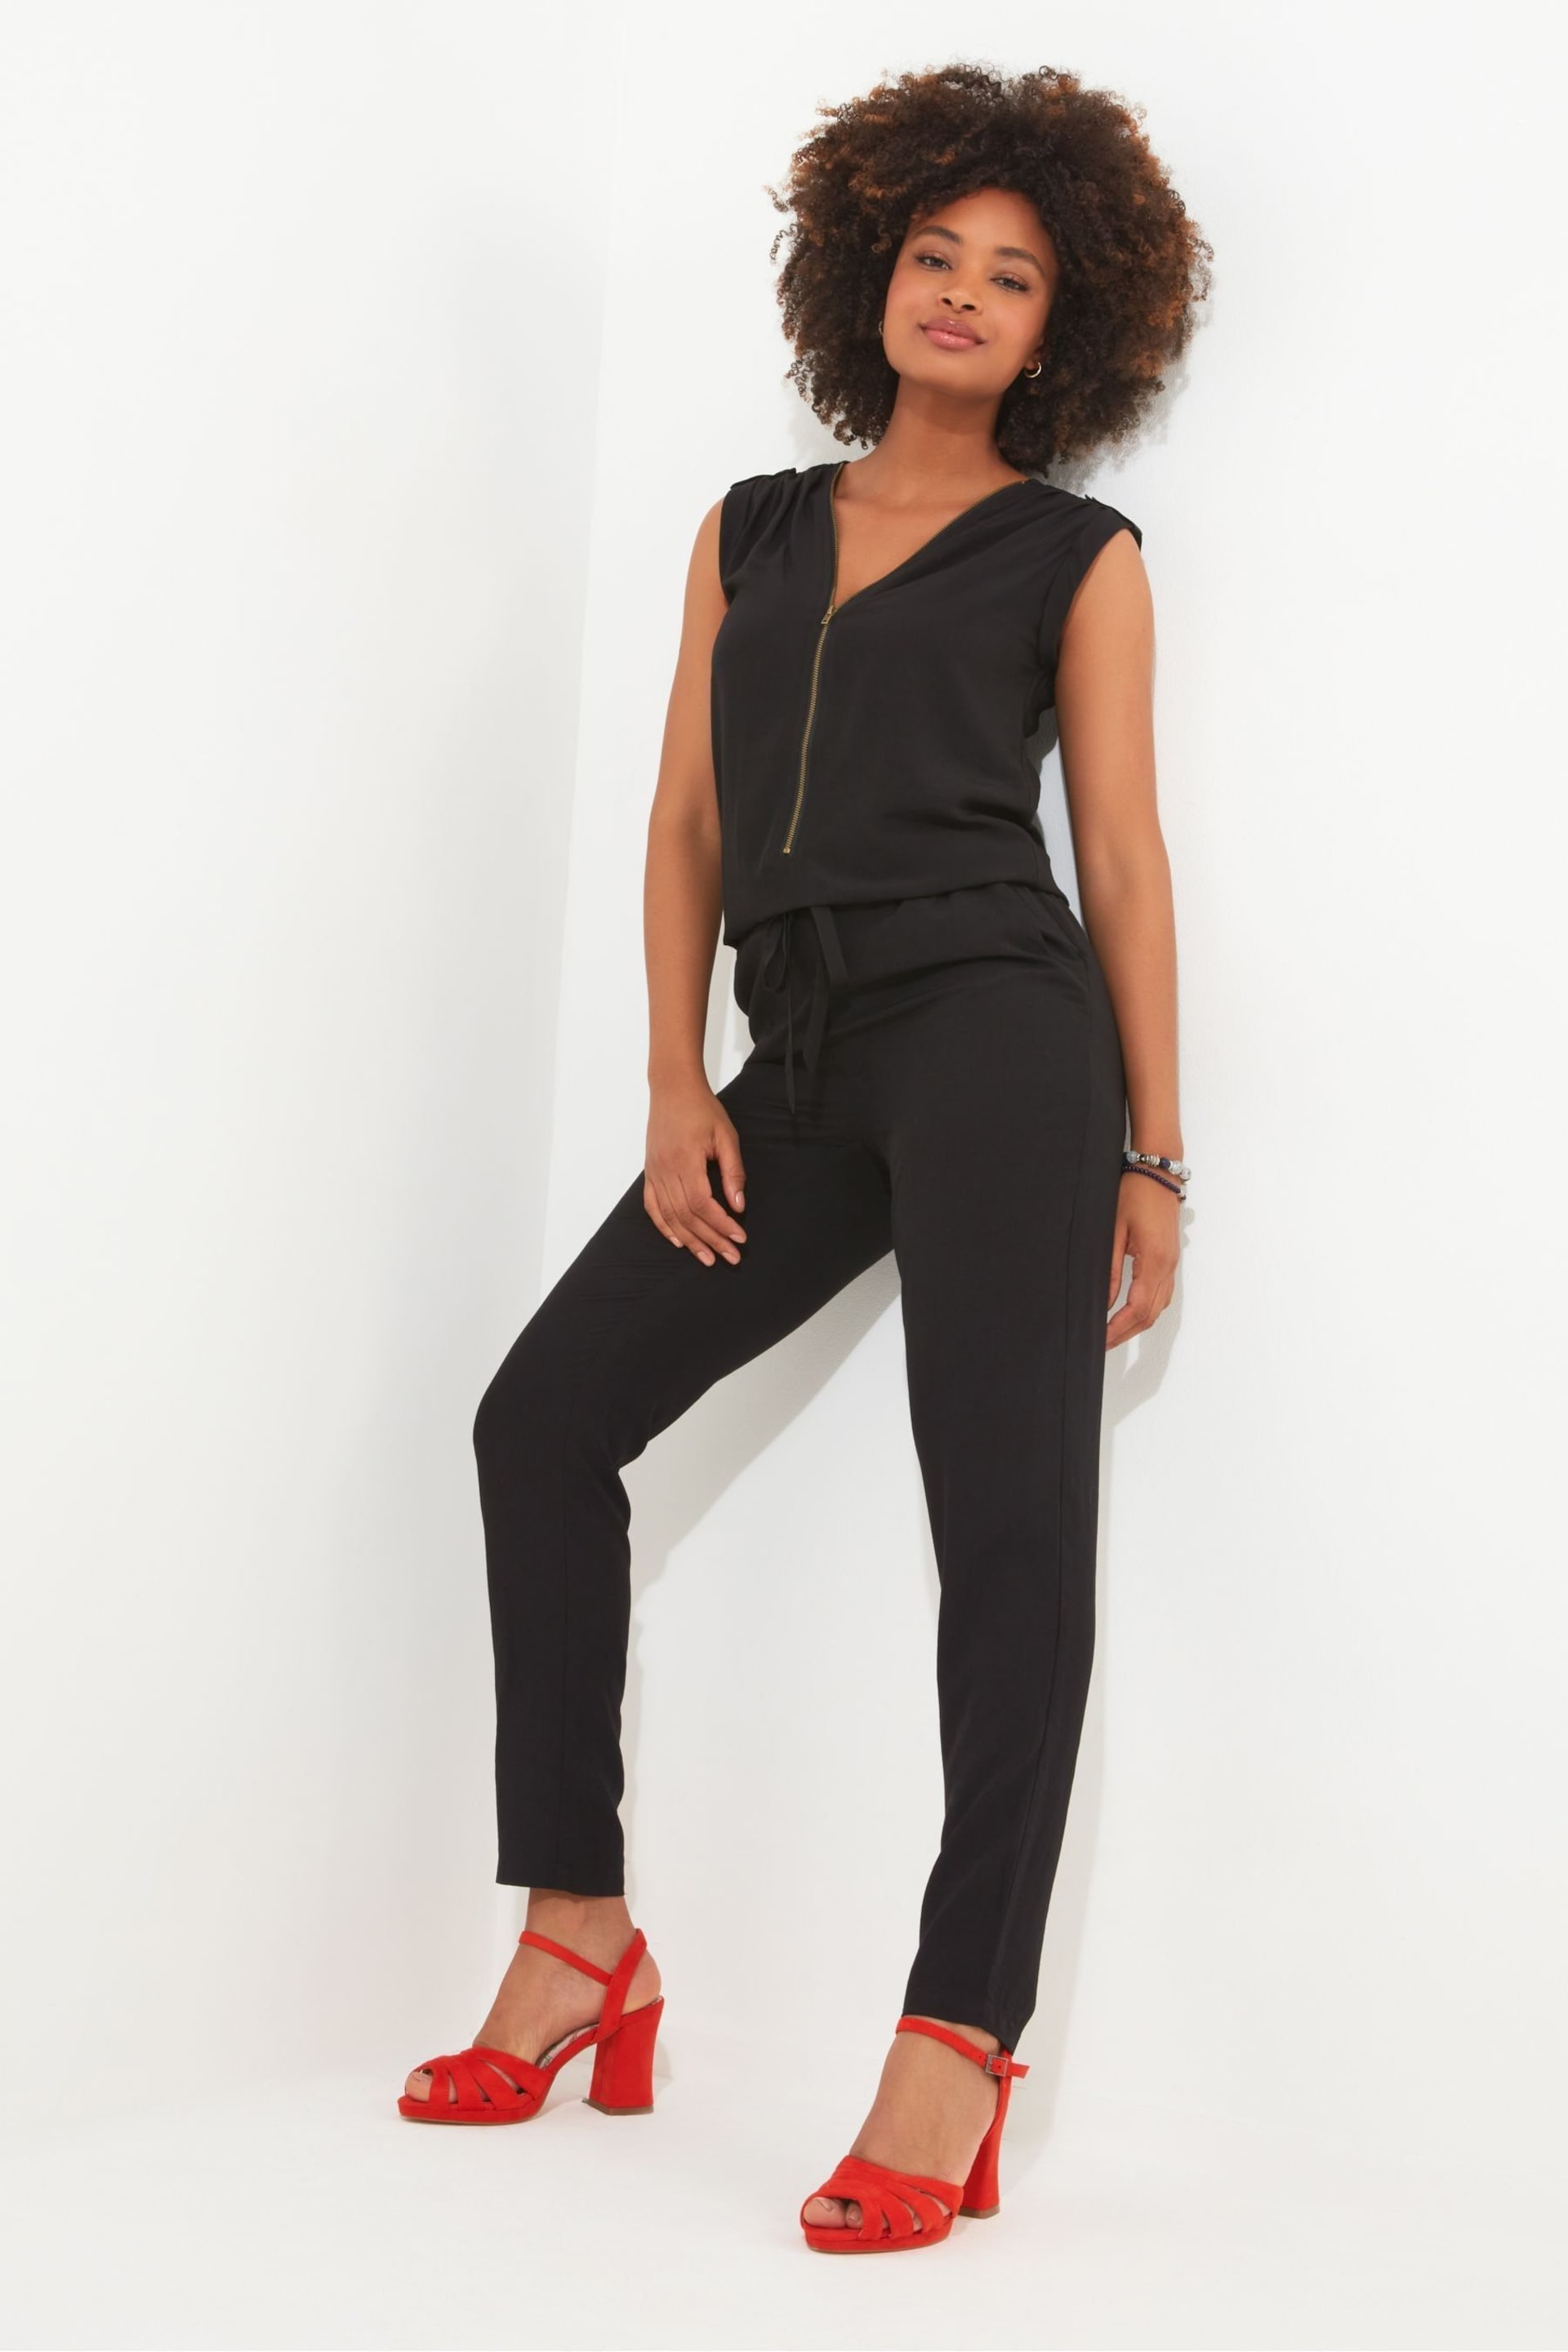 Joe Browns Black Petite Relaxed Fit Zip Front Jumpsuit - Image 1 of 4